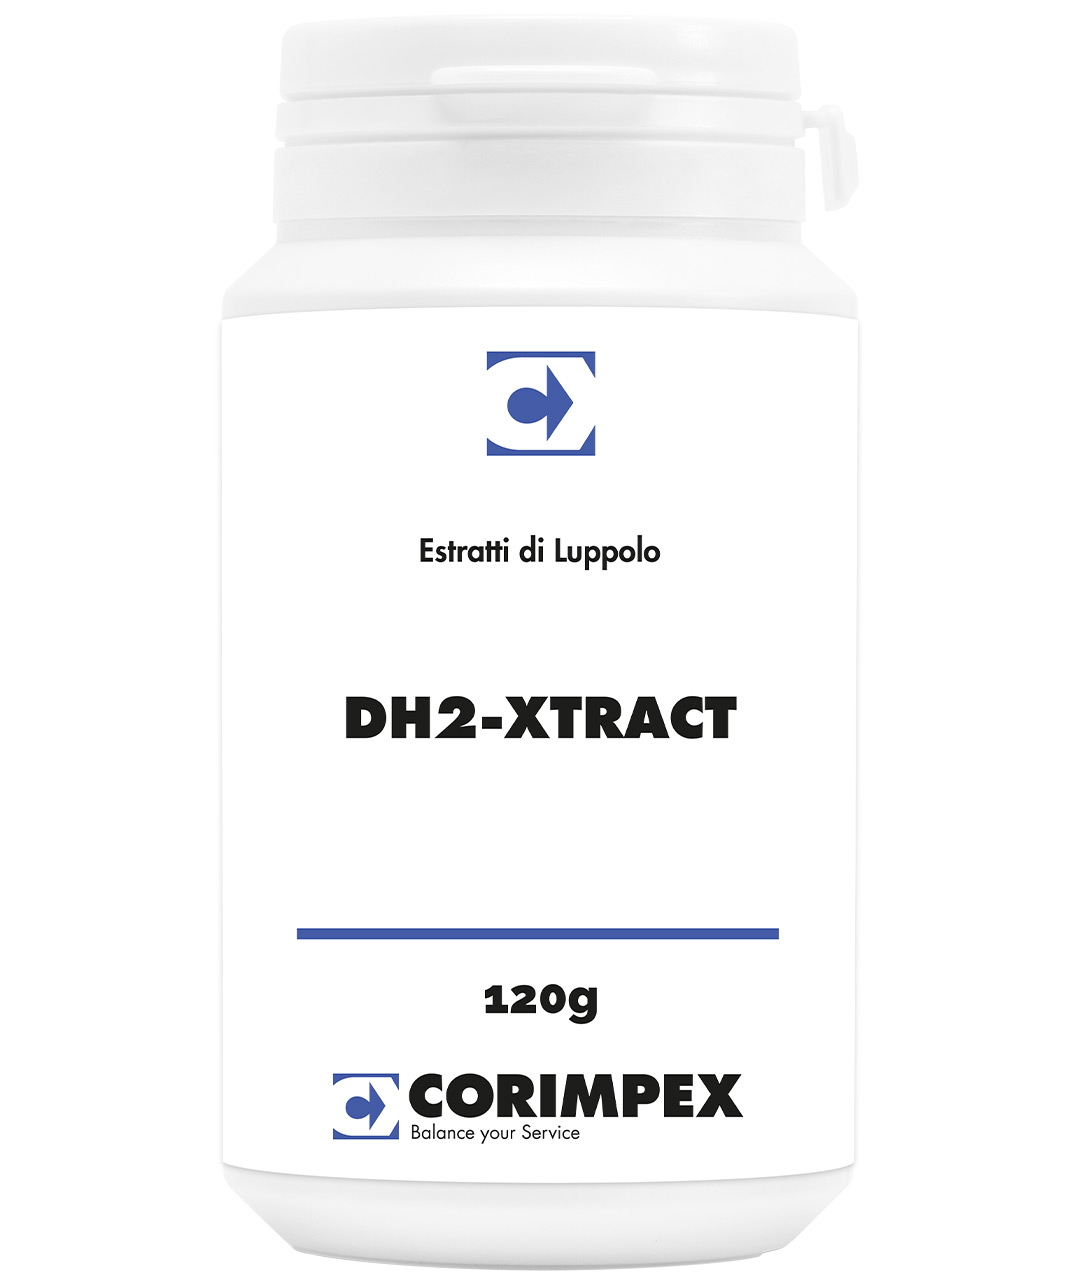 DH2-XTRACT